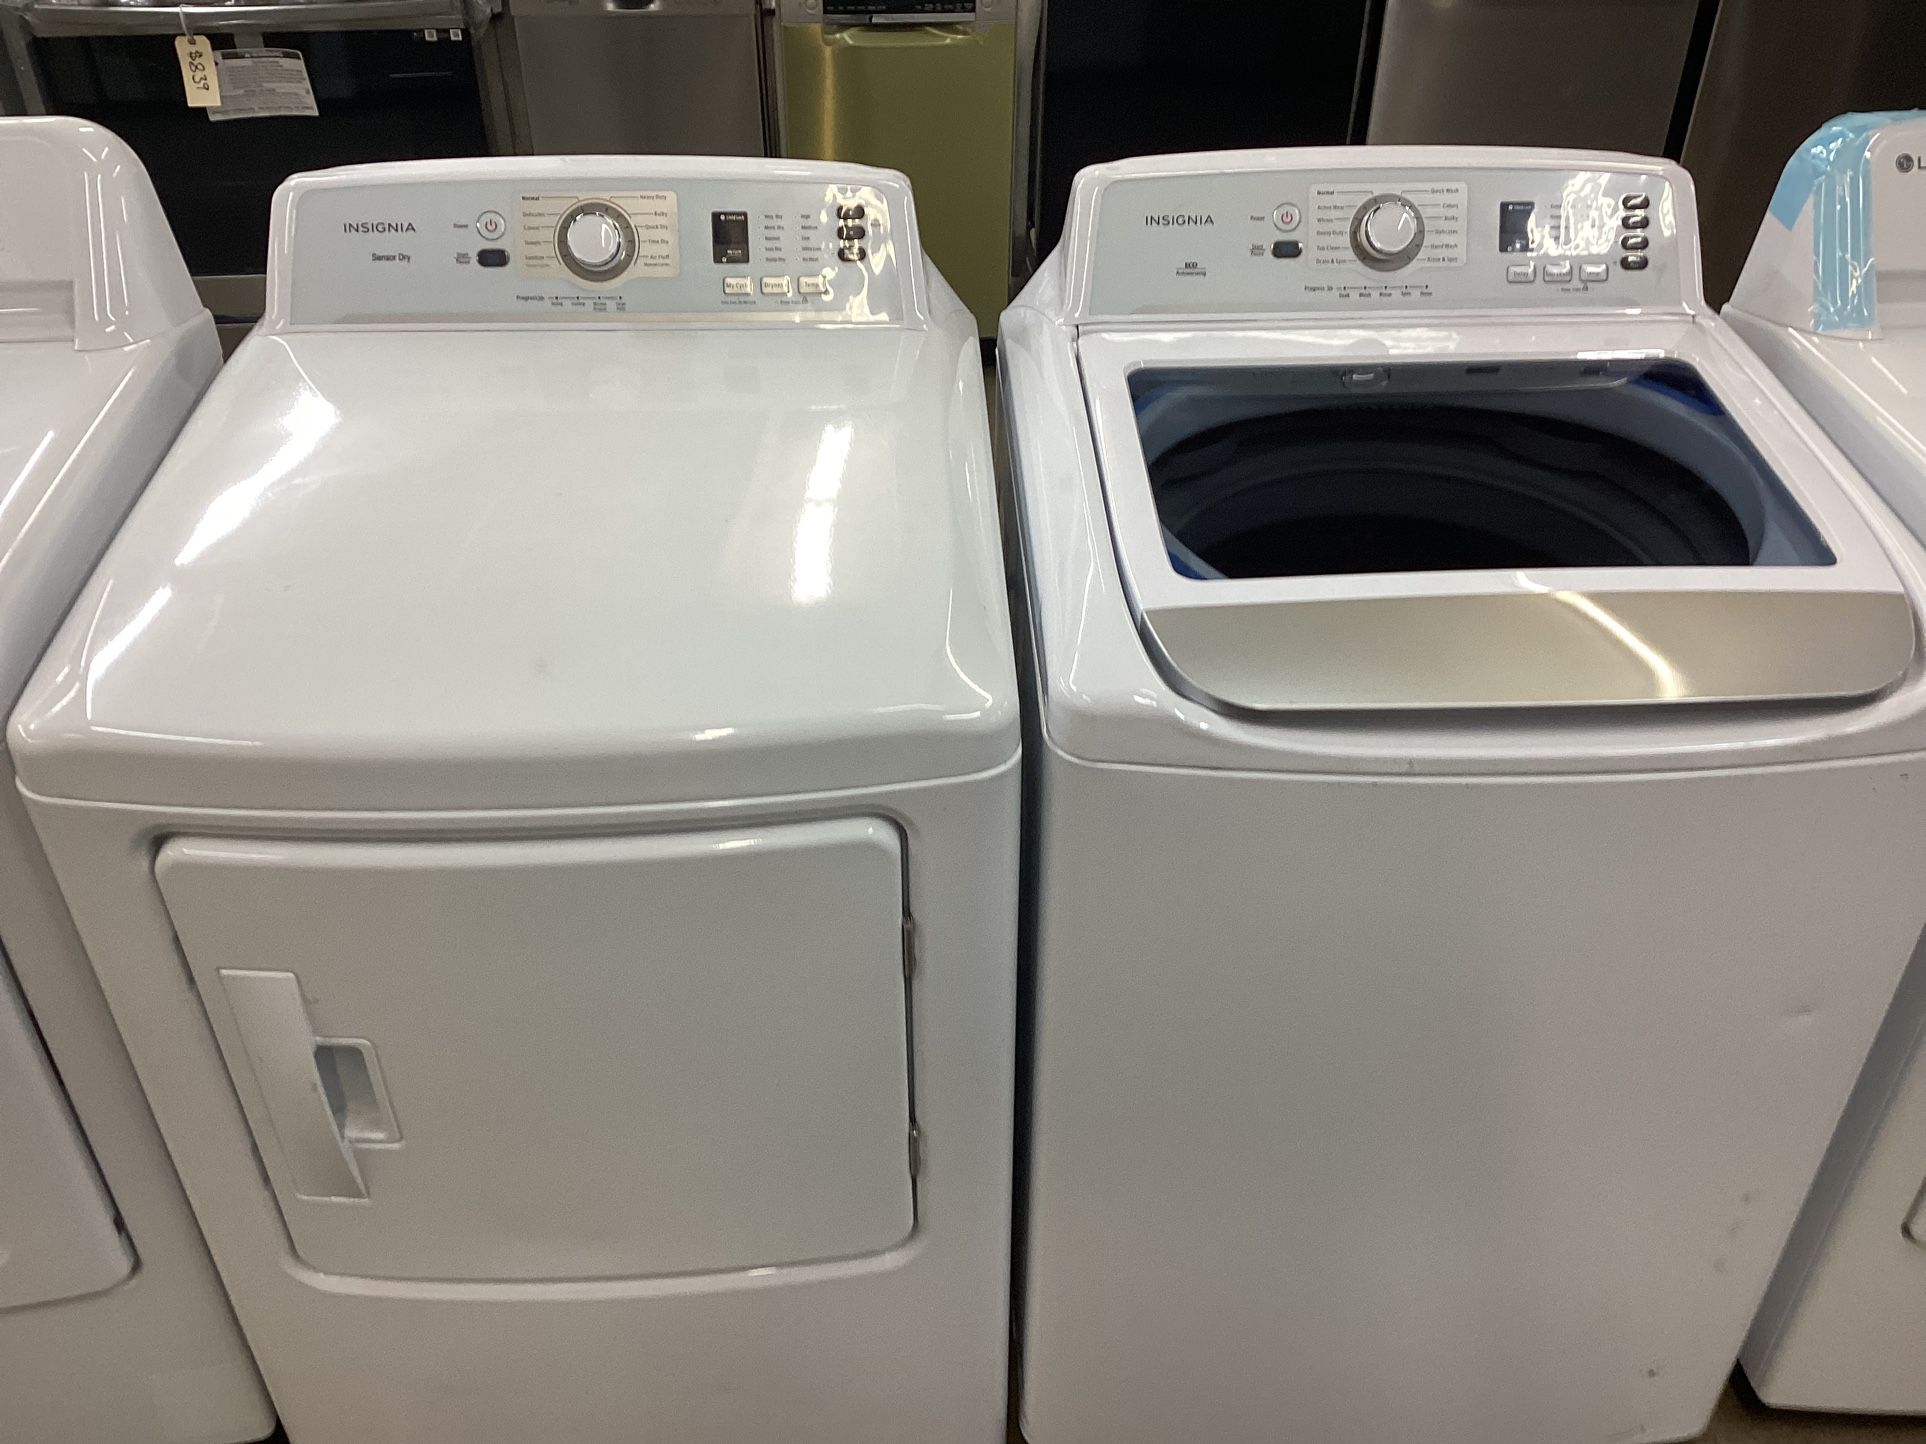 Insignia Washer And Dryer Set New Scratch And Dent 